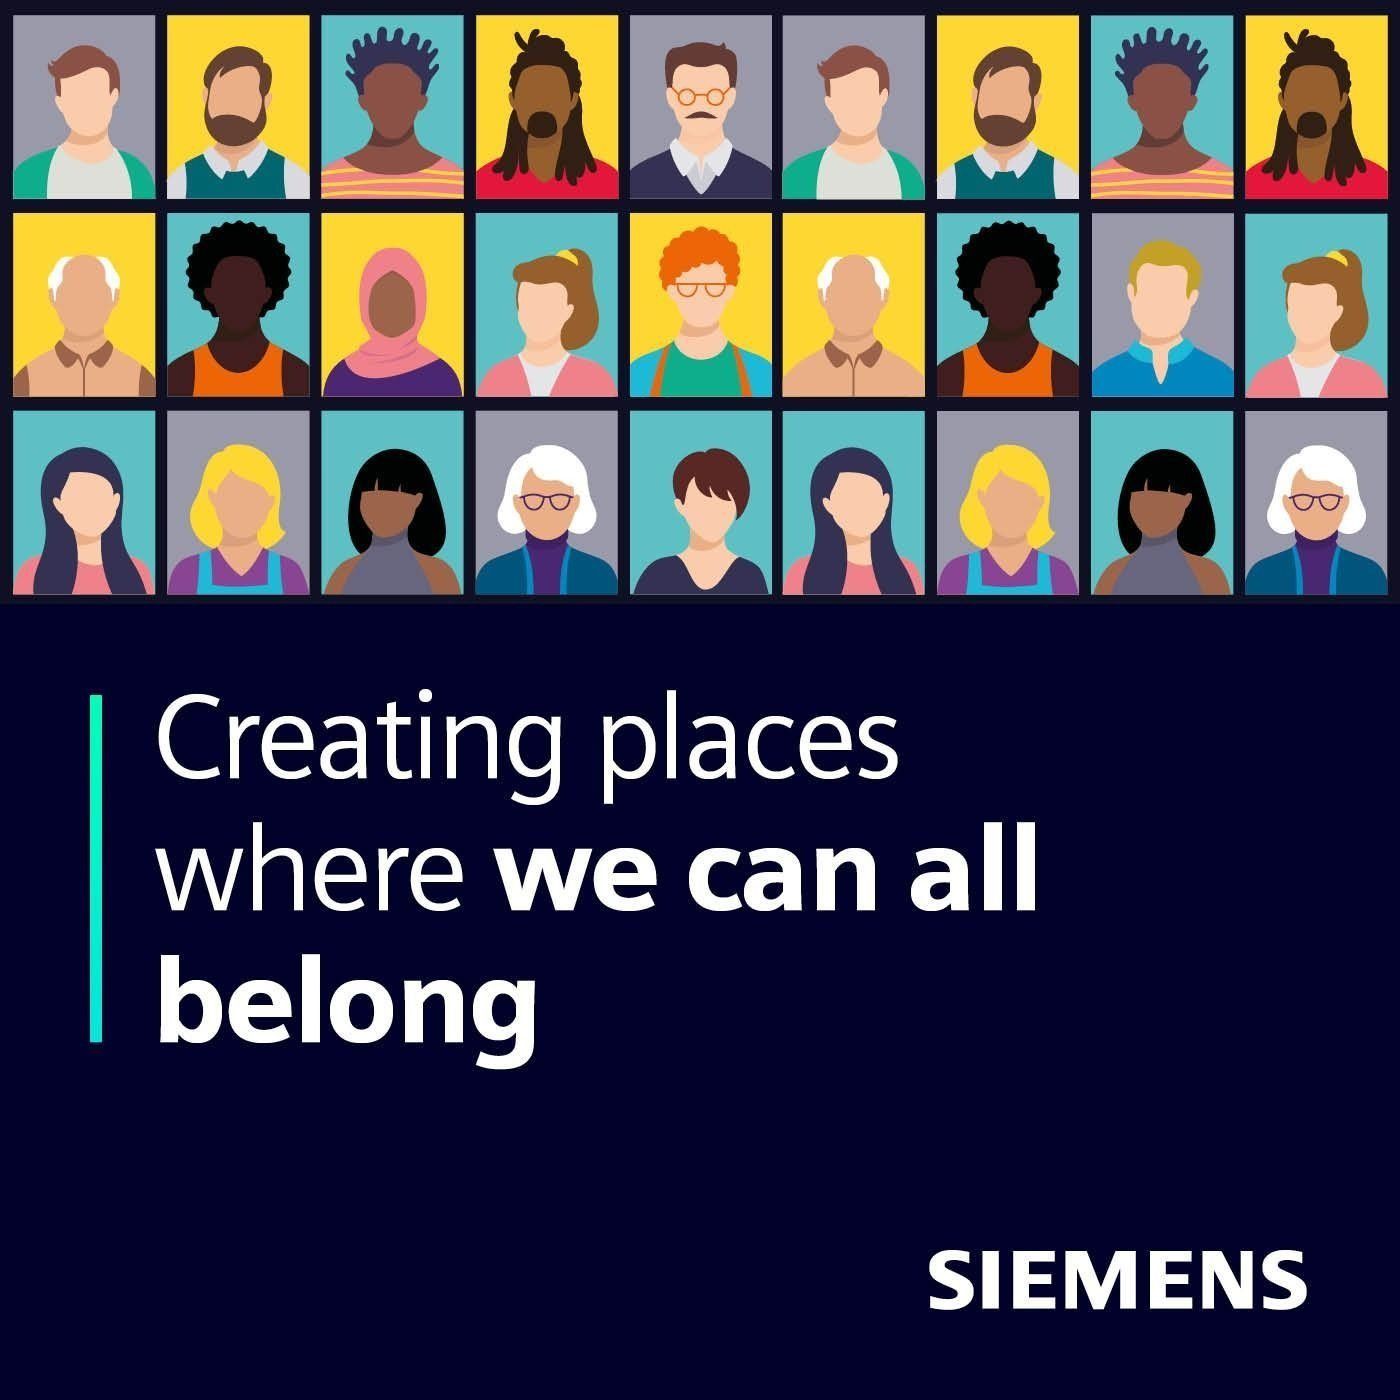 Creating places where we can all belong